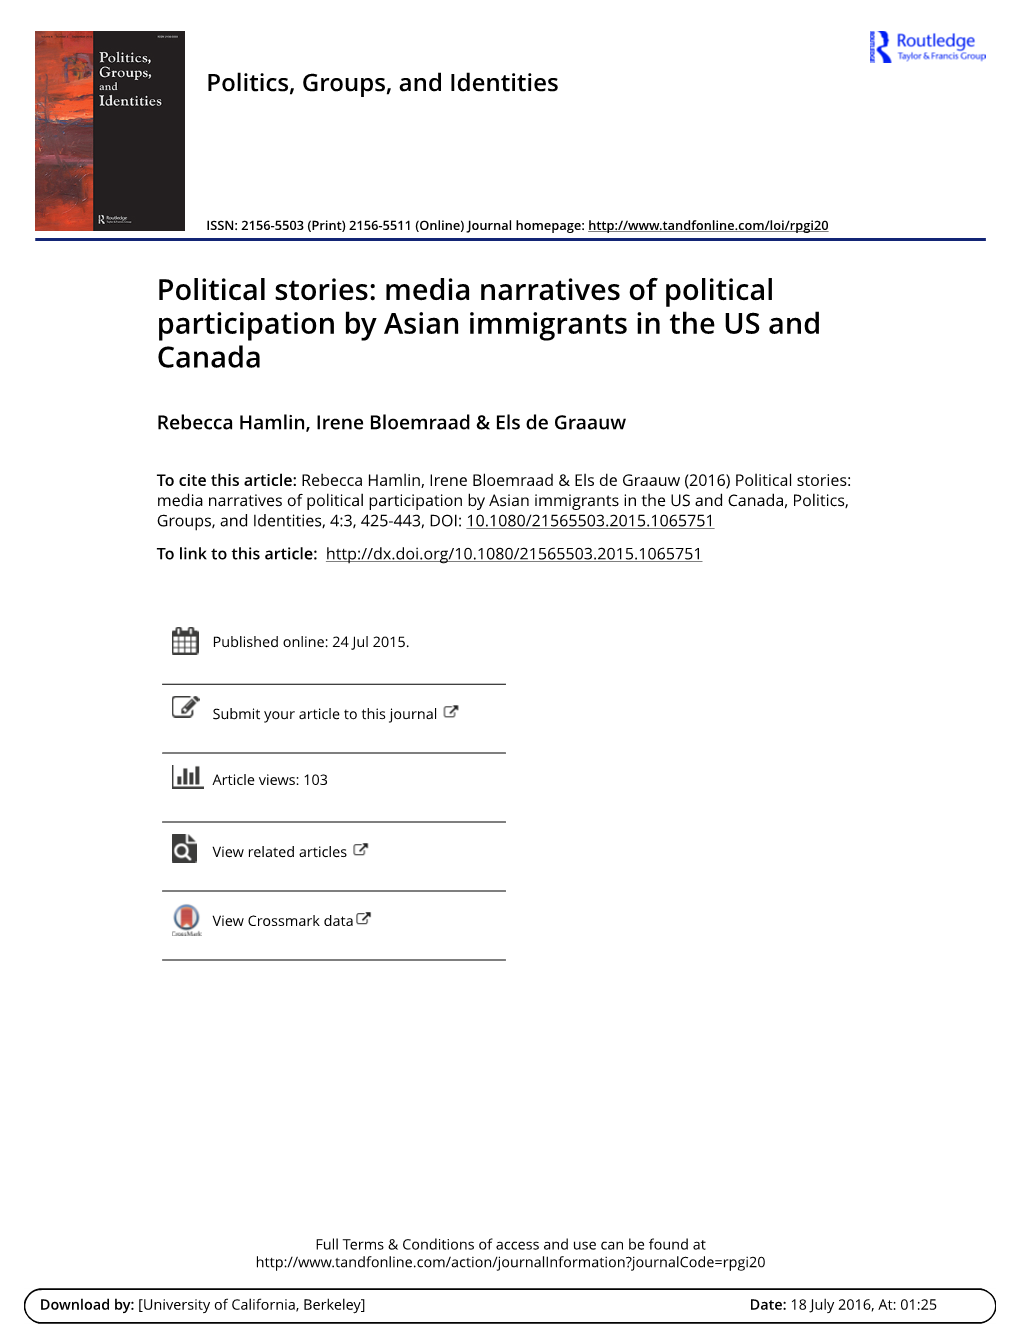 Media Narratives of Political Participation by Asian Immigrants in the US and Canada